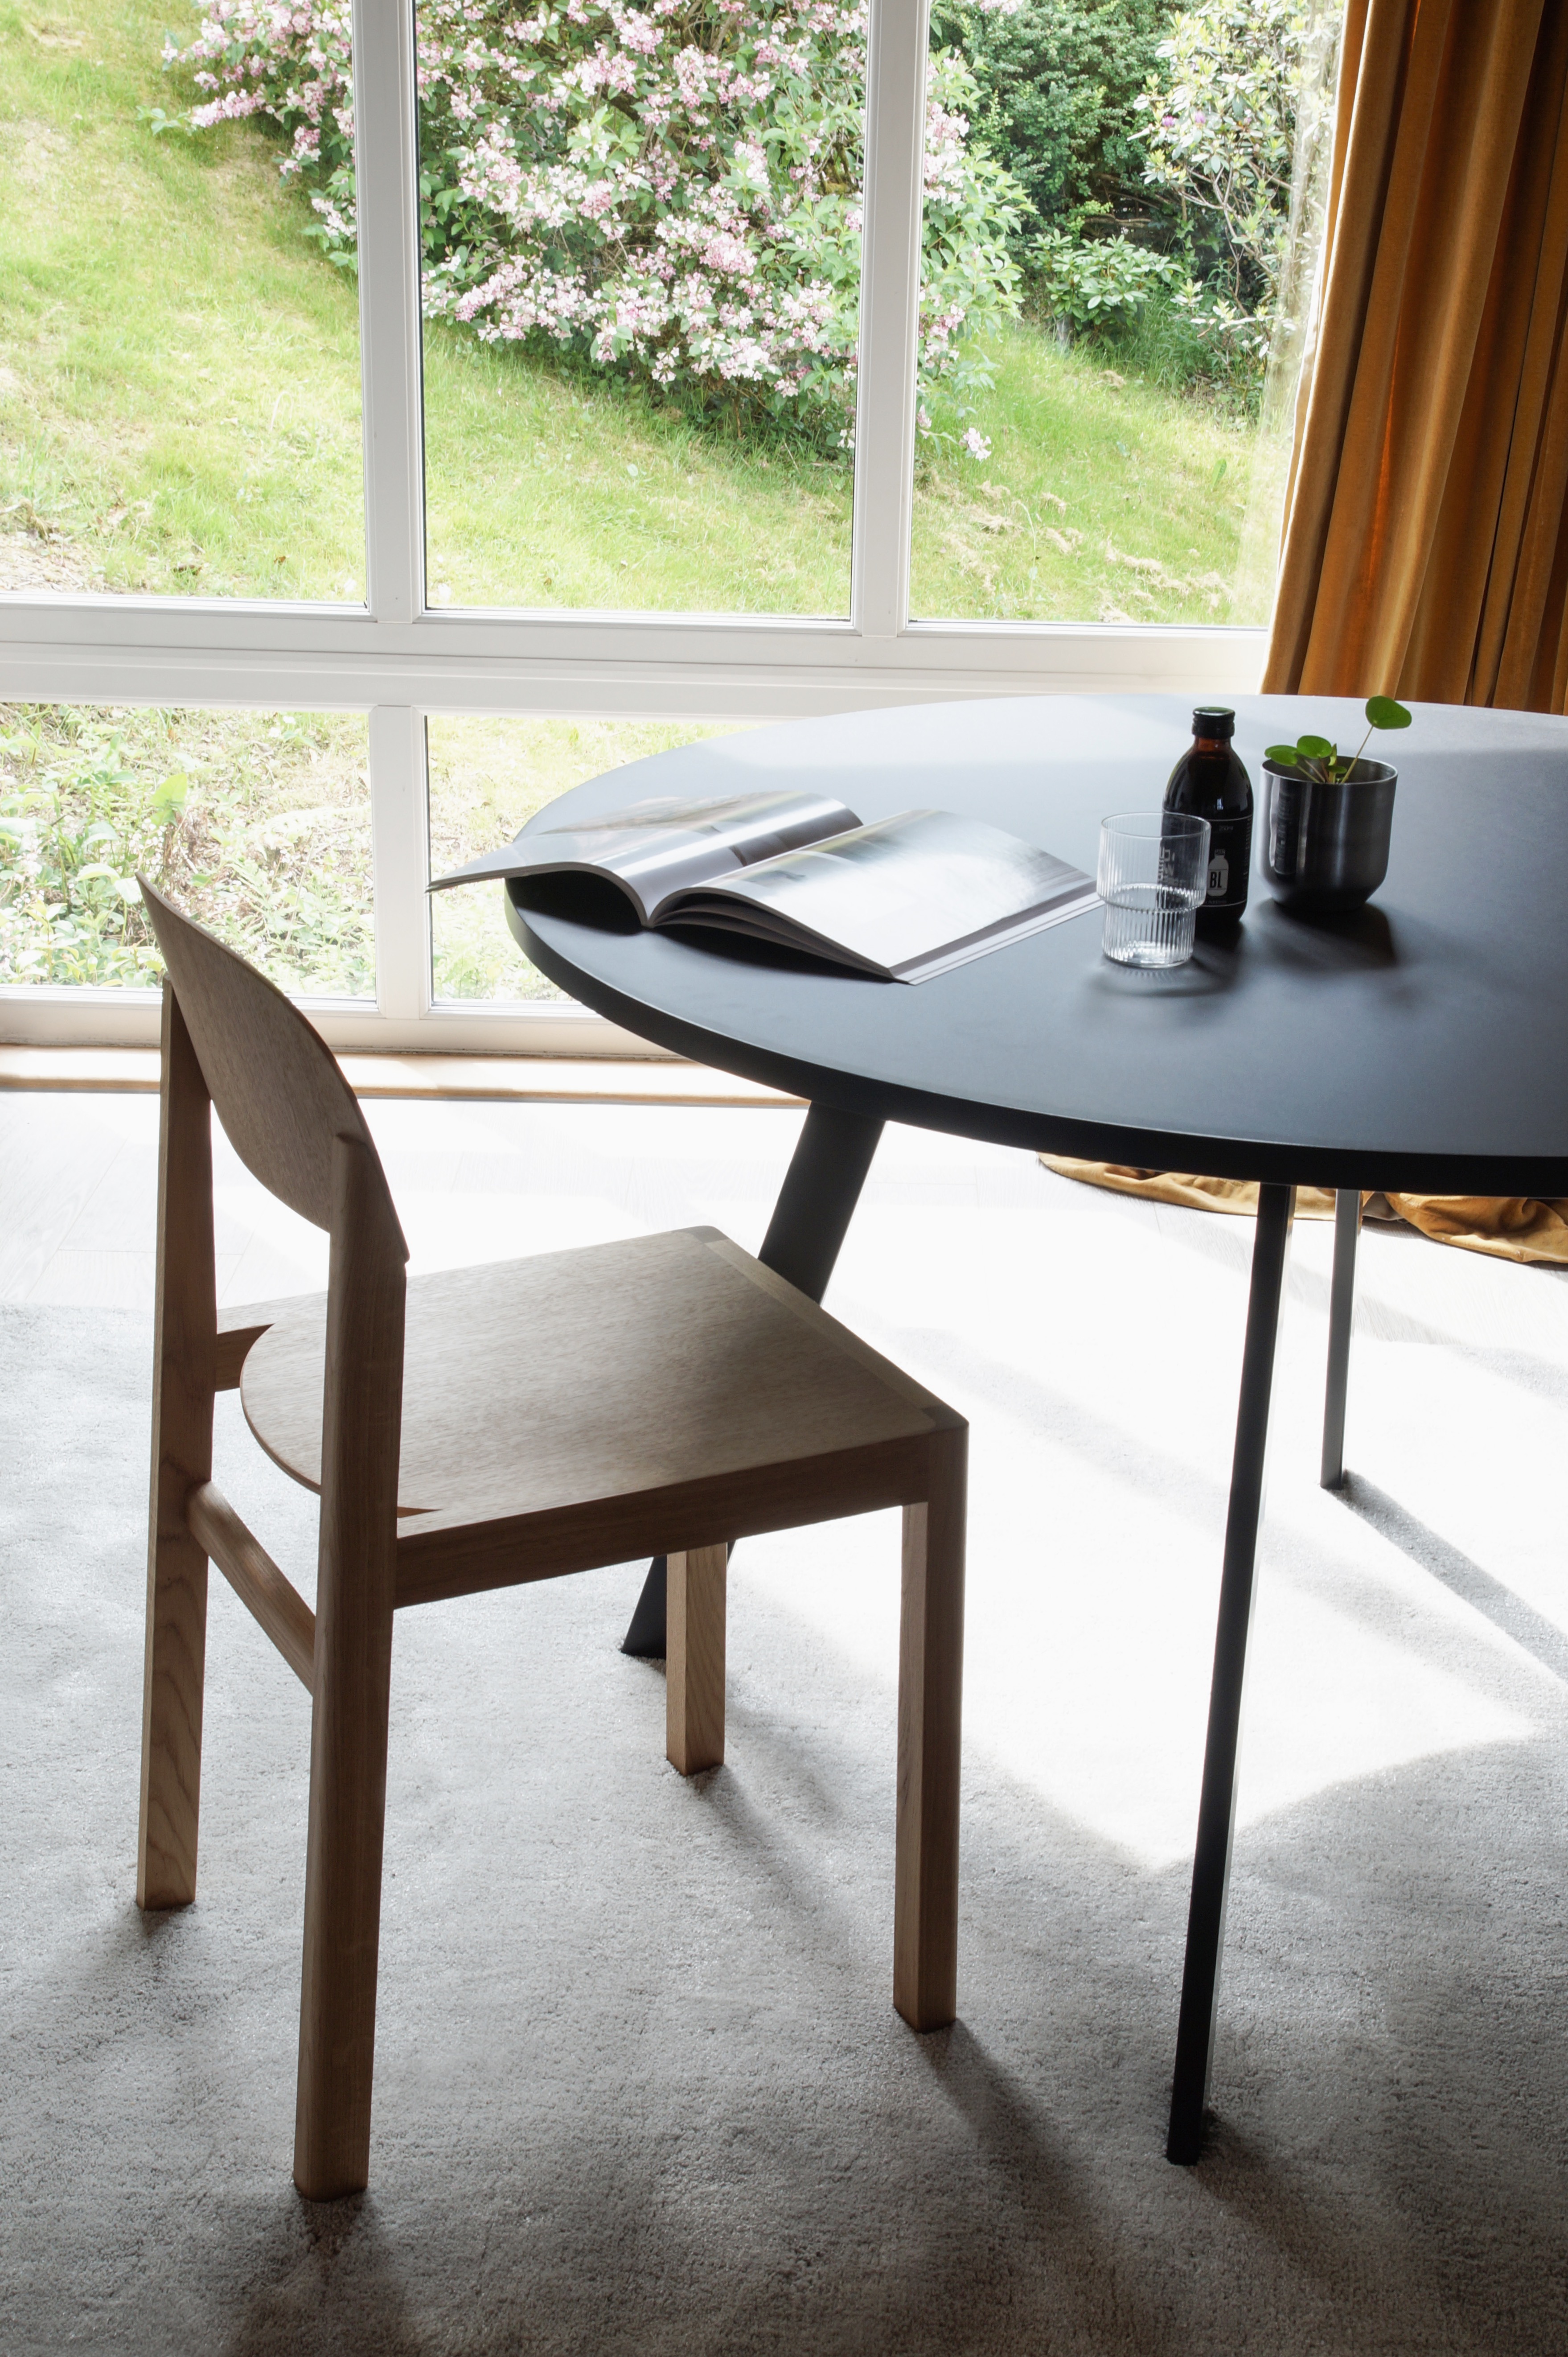 The perfect round dining table - K2 dining table from JENSENplus